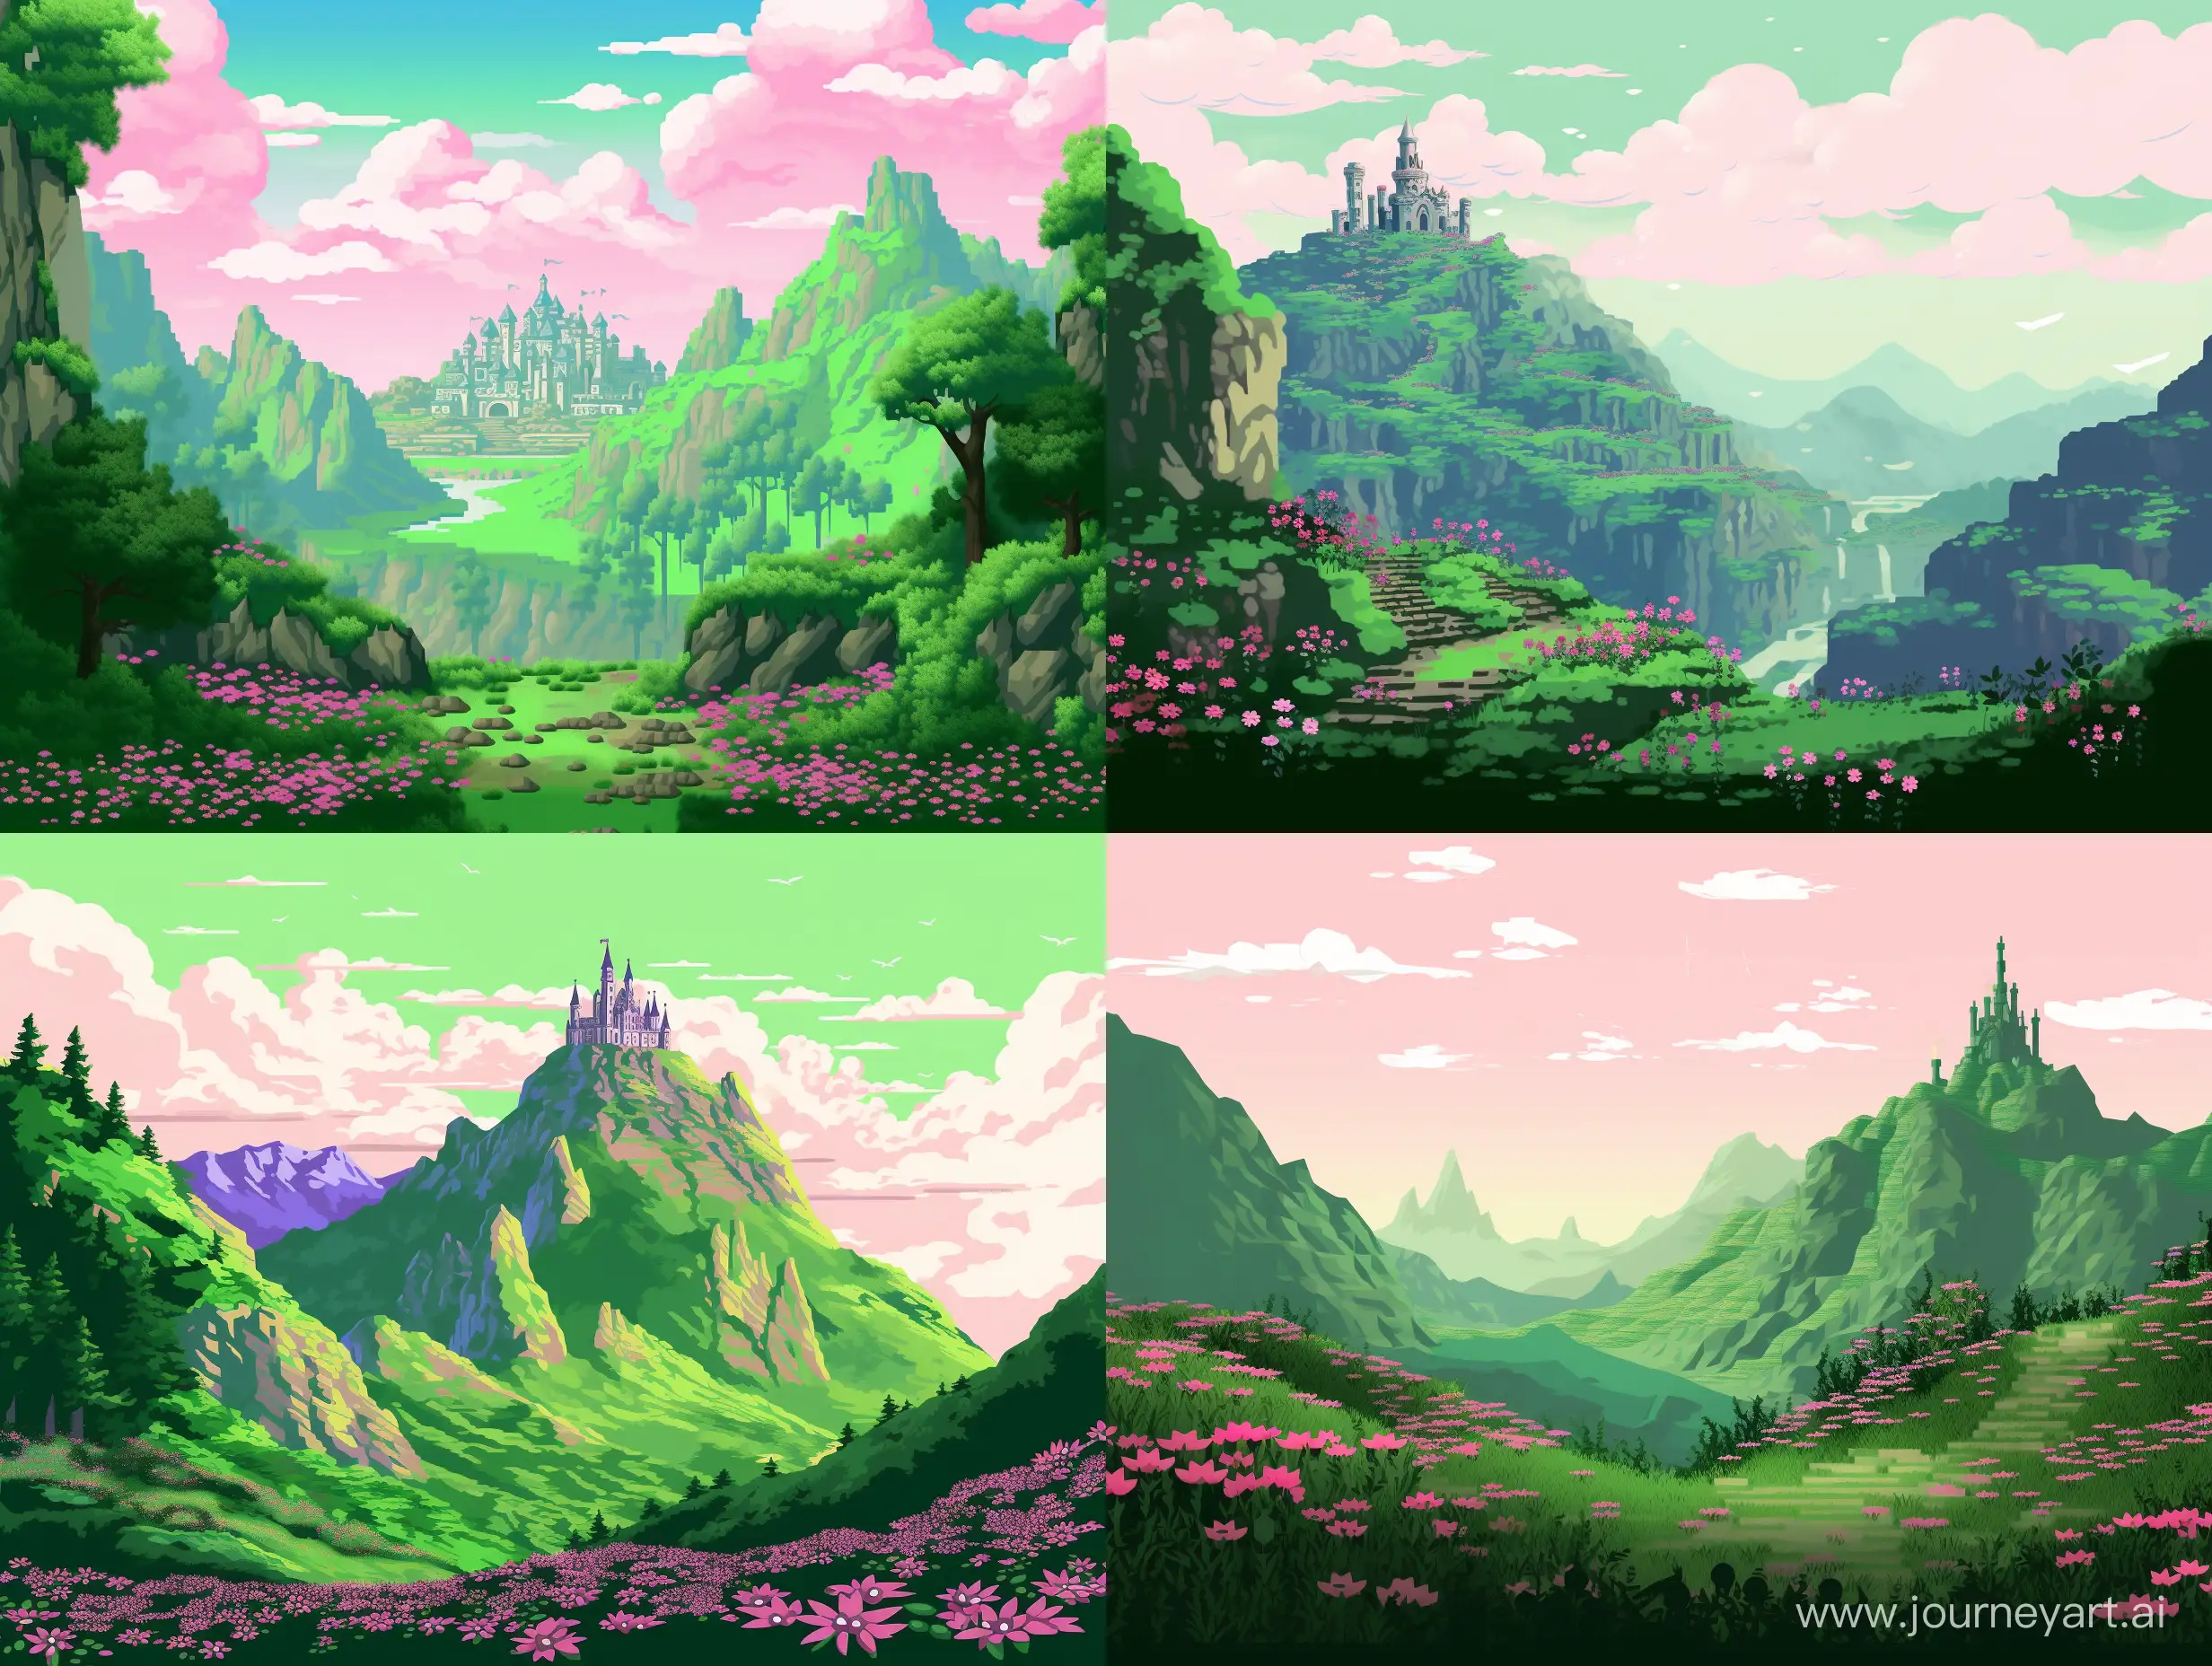 The image shows a landscape made in pixel graphics, reminiscent of the style of old video games. Green hills covered with grass and small pink-toned flowers make up the foreground. In the center in the background stands a massive mountain or high hill, the top of which is clothed in green vegetation, which gives it an appearance reminiscent of the silhouette of a castle or an ancient fortress. Above it all, the sky stretches with vast, fluffy clouds taking up most of the upper half of the frame. The style of the image creates the impression of a calm and pleasant fantasy area.